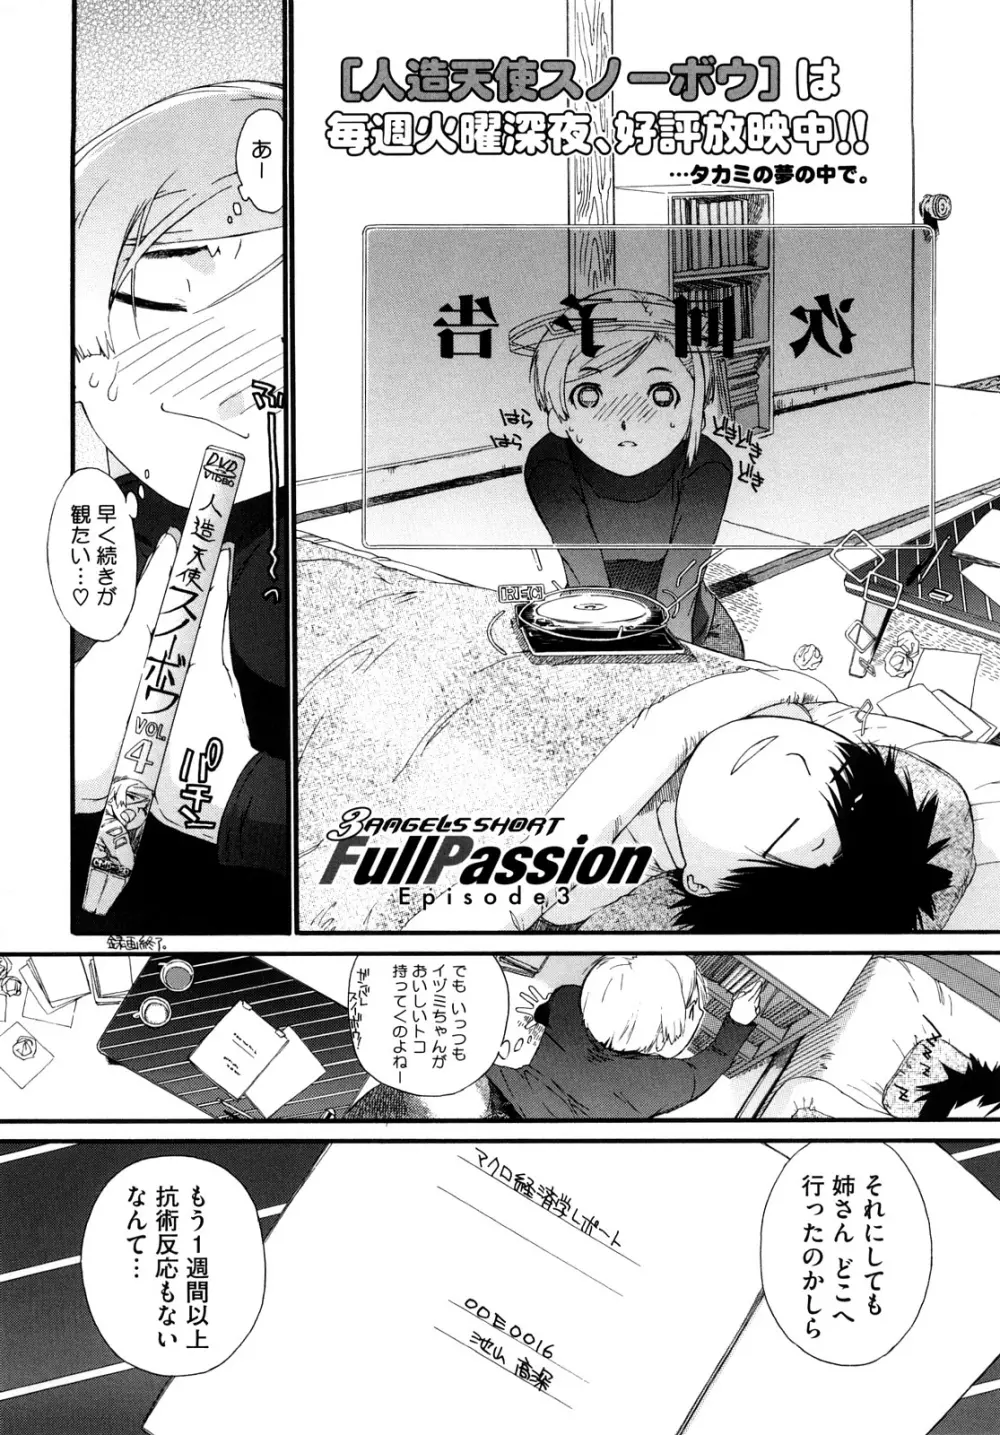 3ANGELS SHORT Full Passion Page.71